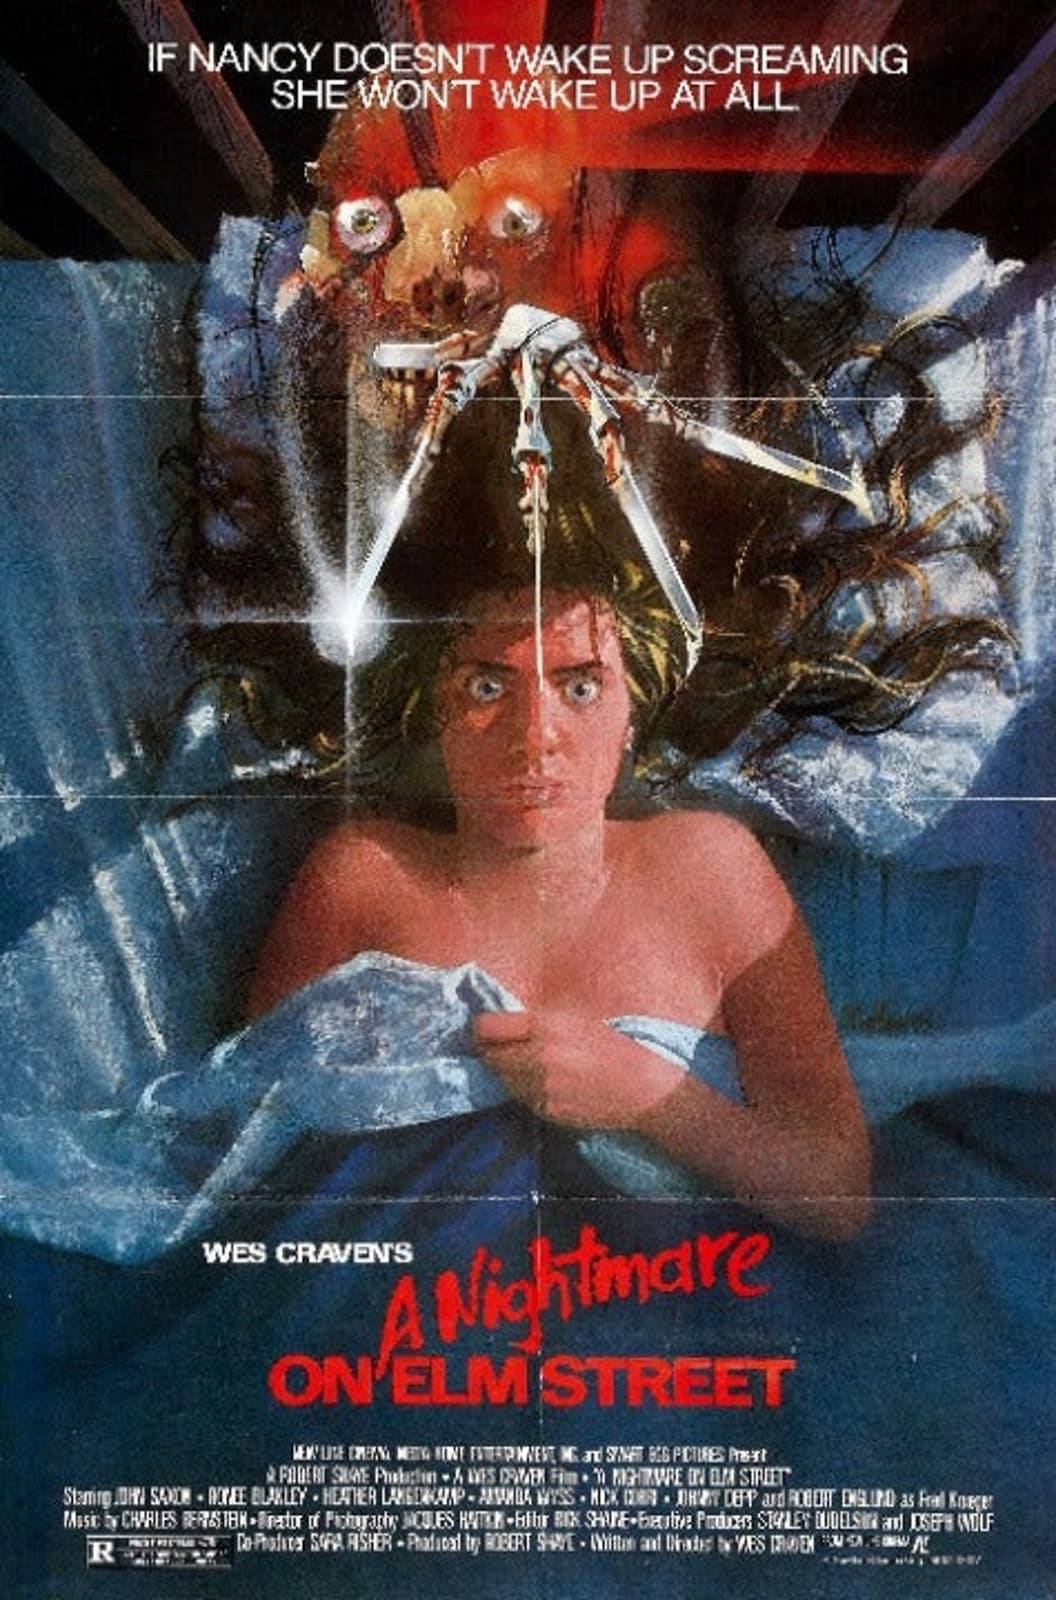 36" x 60" Nightmare On Elm Street Tapestry Wall Hanging Décor